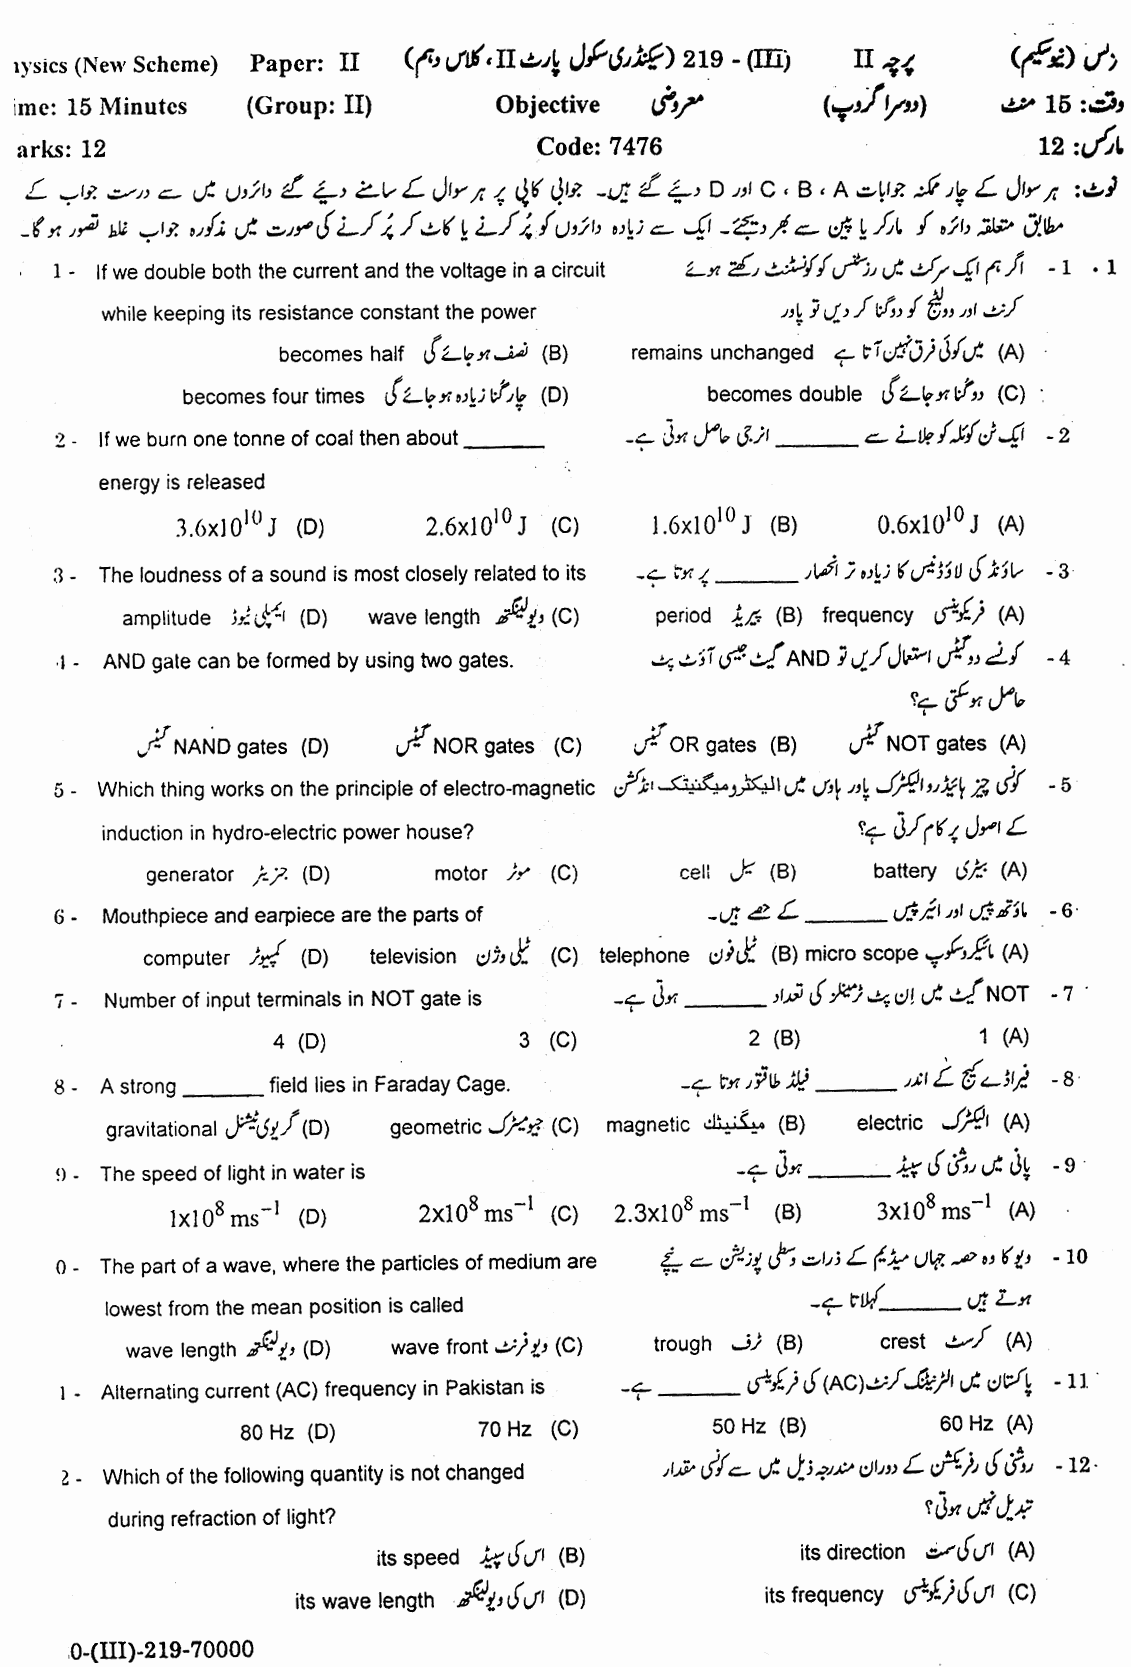 10th Class Physics Paper 2019 Gujranwala Board Objective Group 2